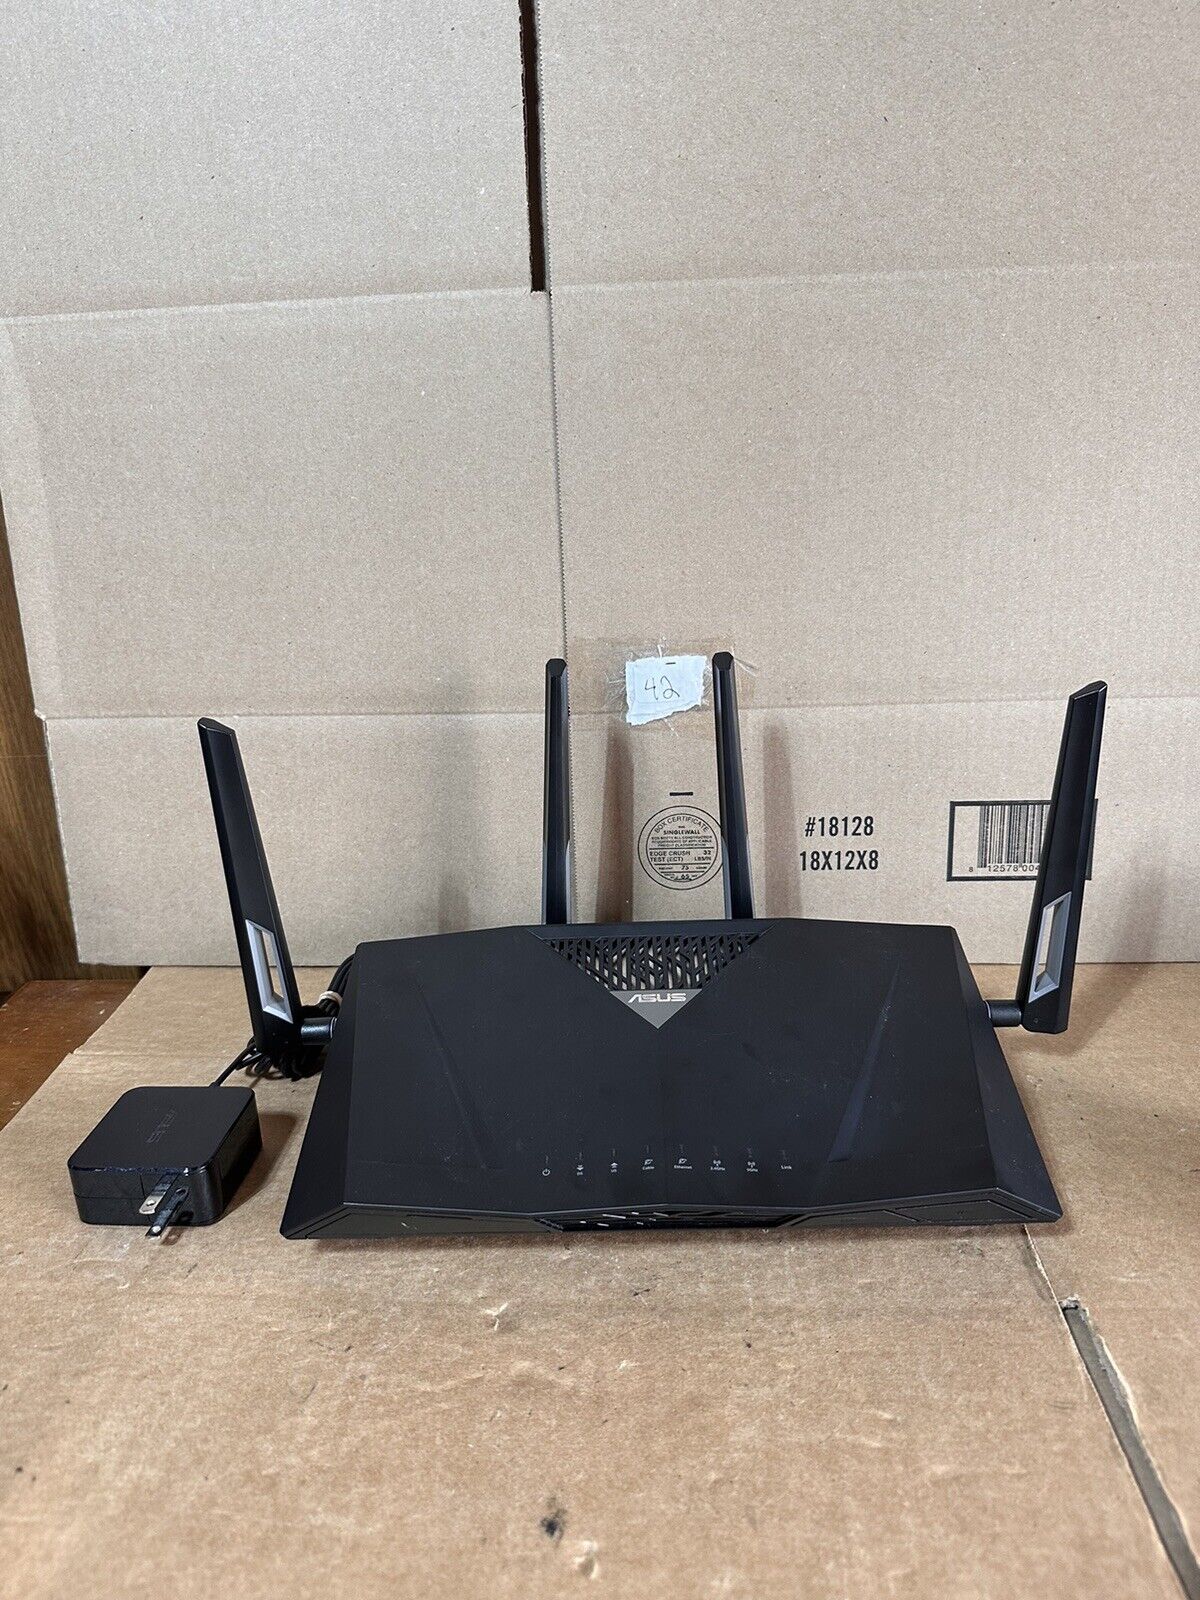 ASUS CM-32 _AC2600  Wireless Dual Band Cable Modem Router